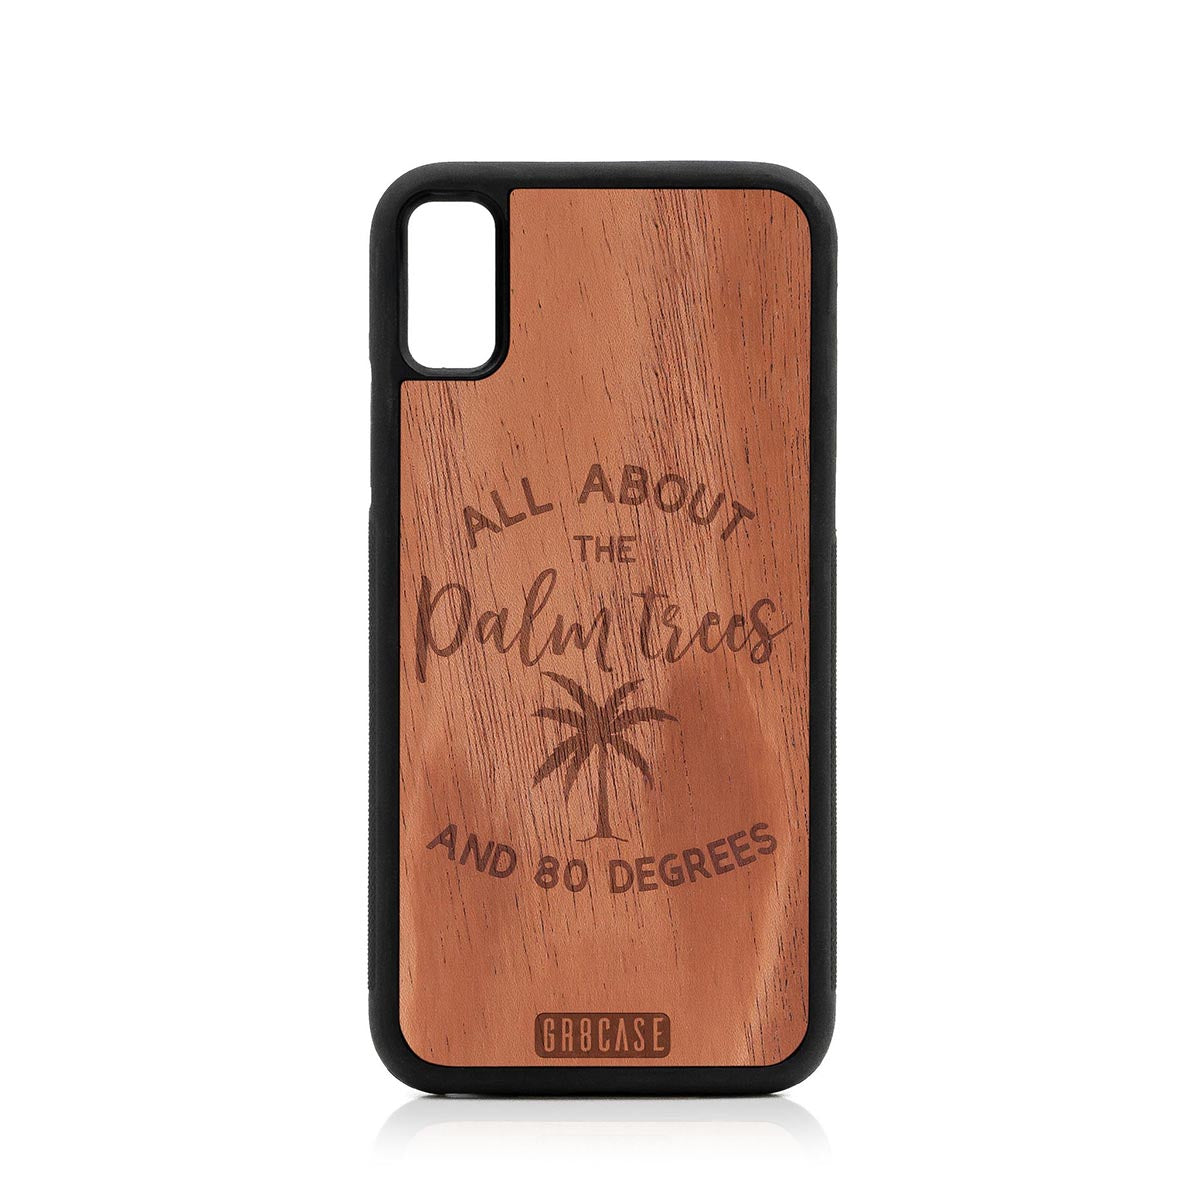 All About The Palm Trees and 80 Degrees Design Wood Case For iPhone X/XS by GR8CASE